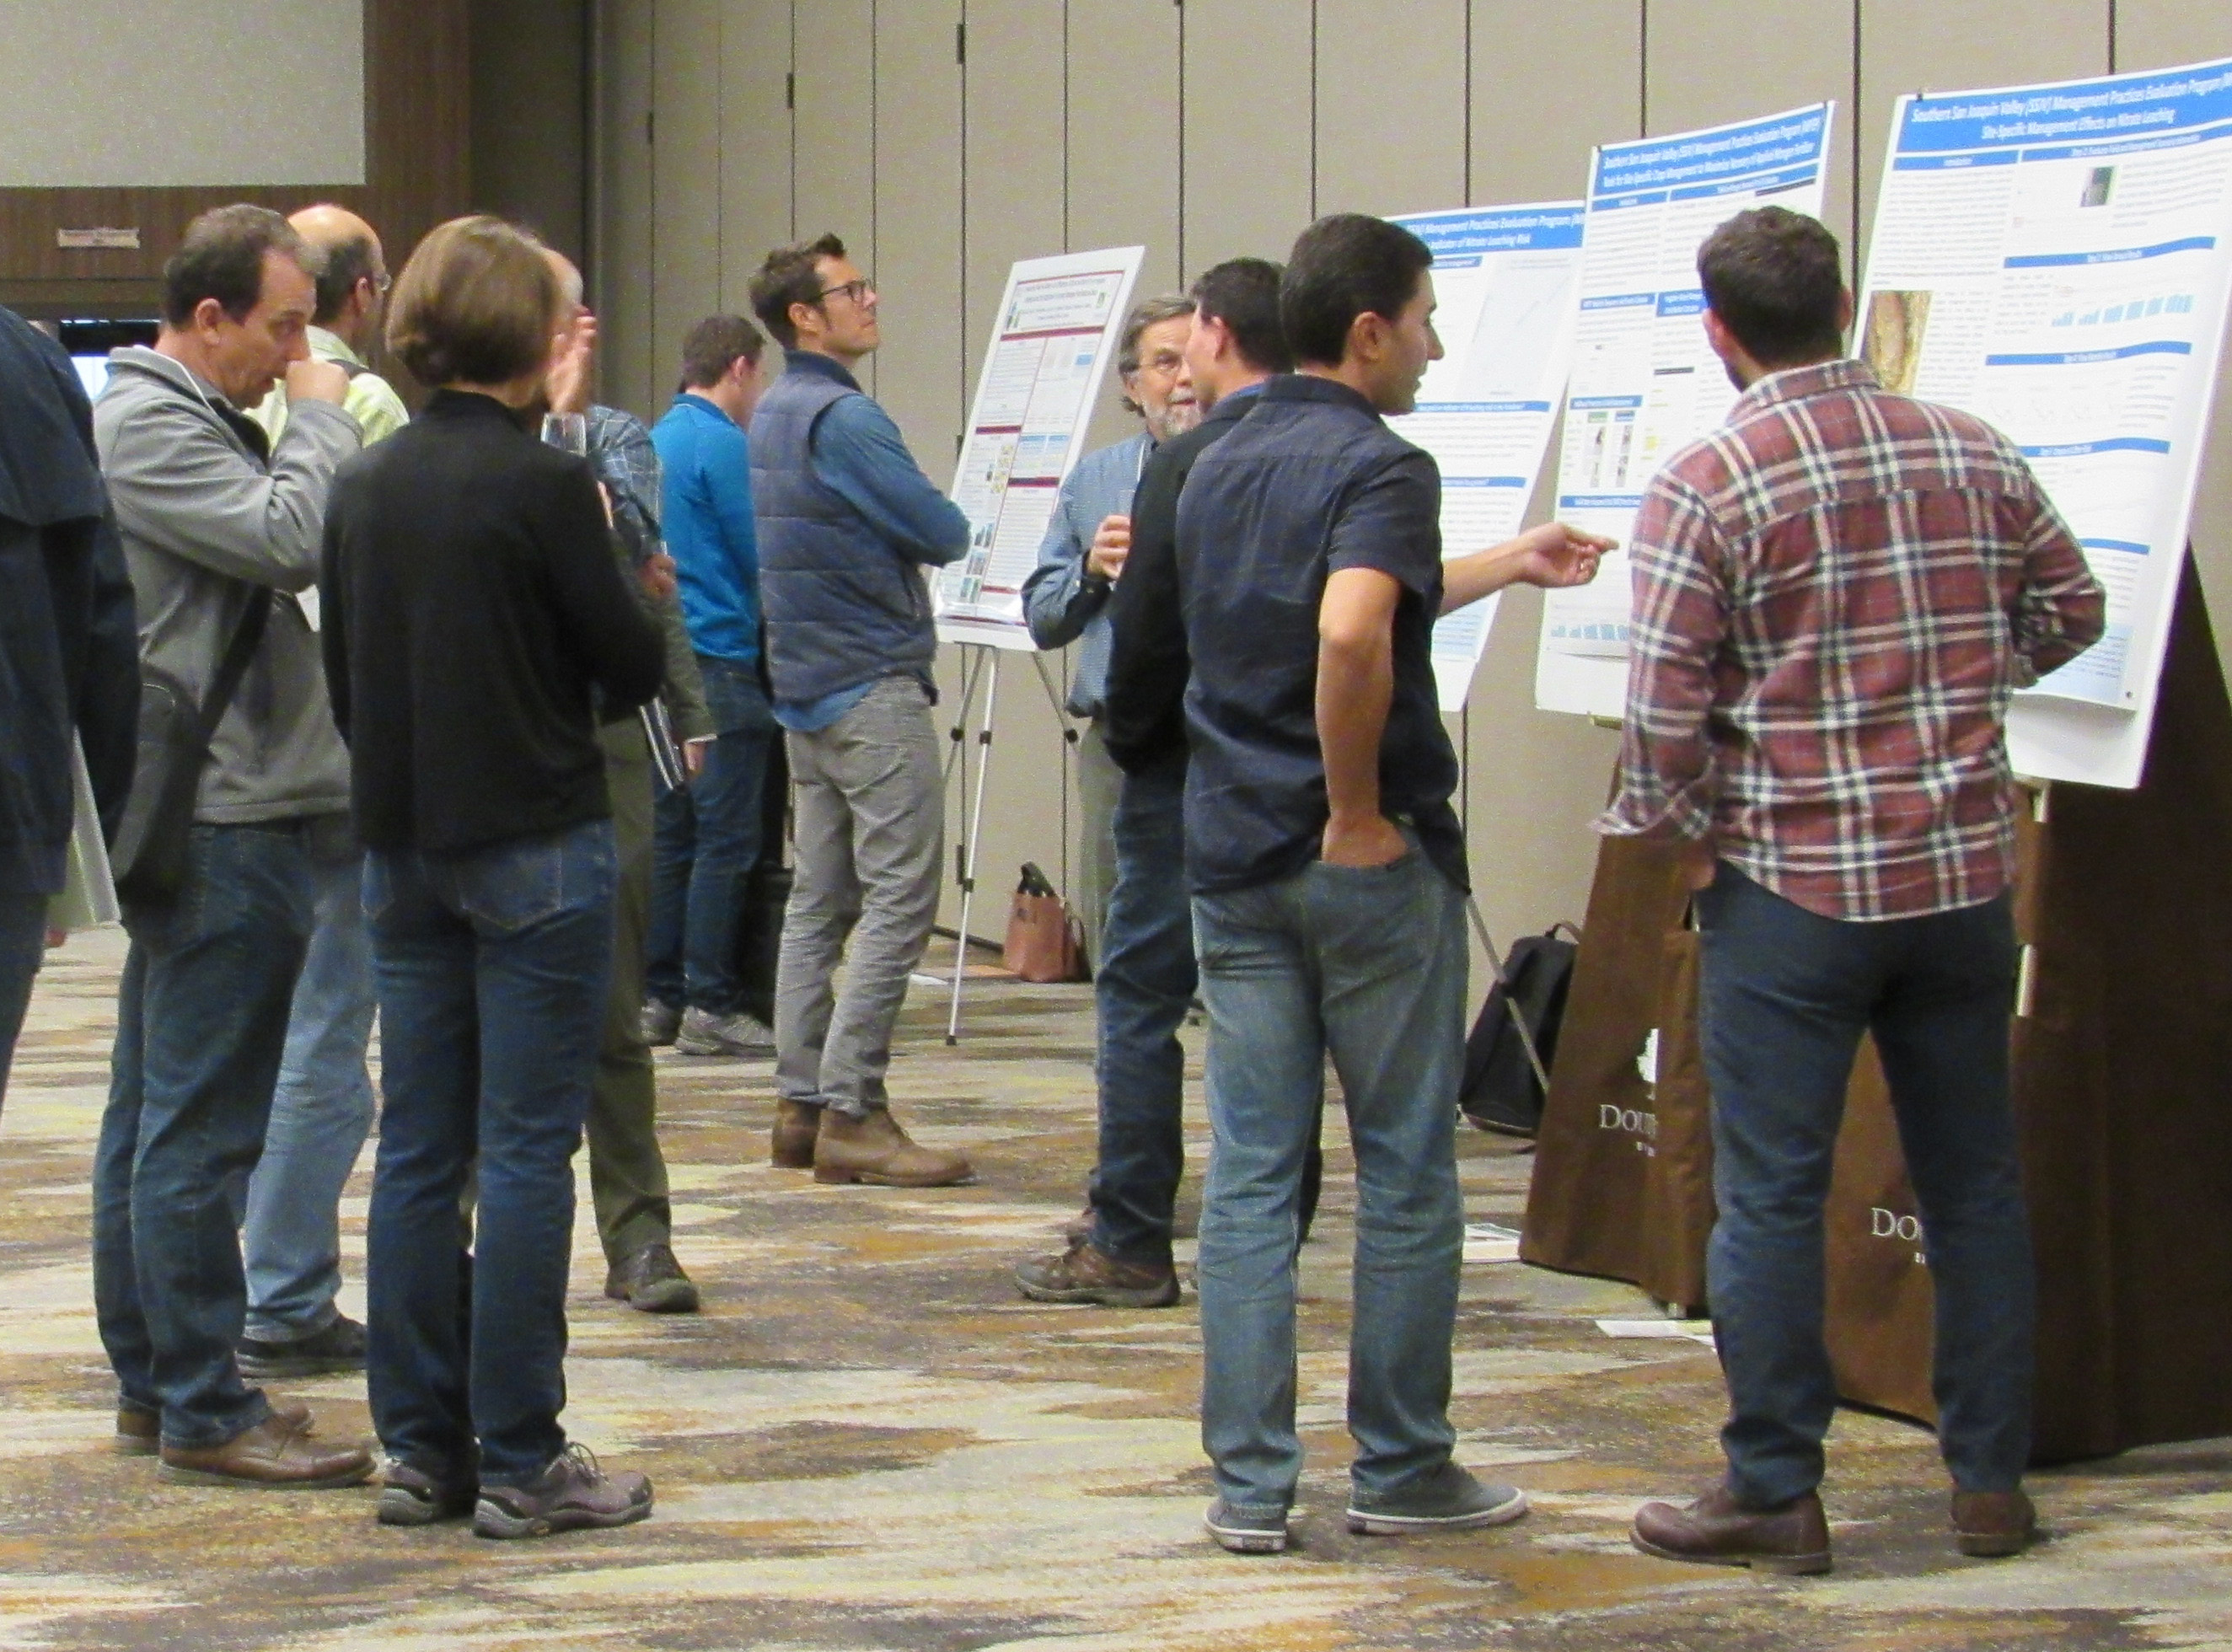 Conference attendees viewing posters and chatting.